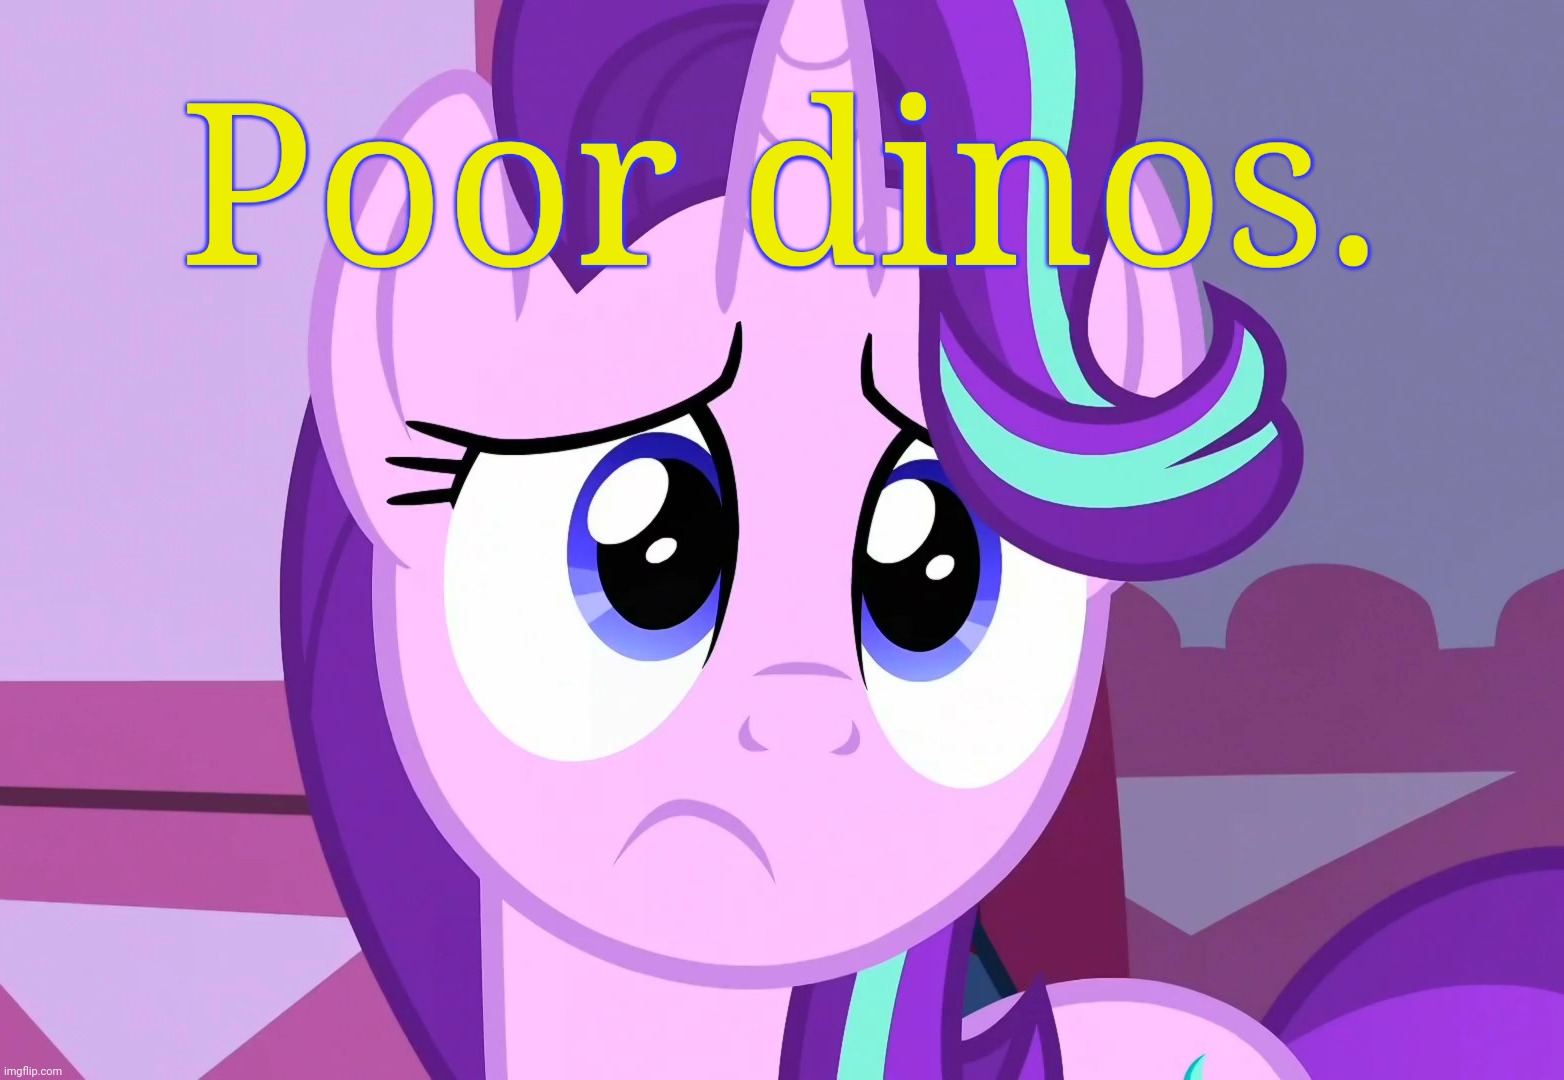 Sadlight Glimmer (MLP) | Poor dinos. | image tagged in sadlight glimmer mlp | made w/ Imgflip meme maker